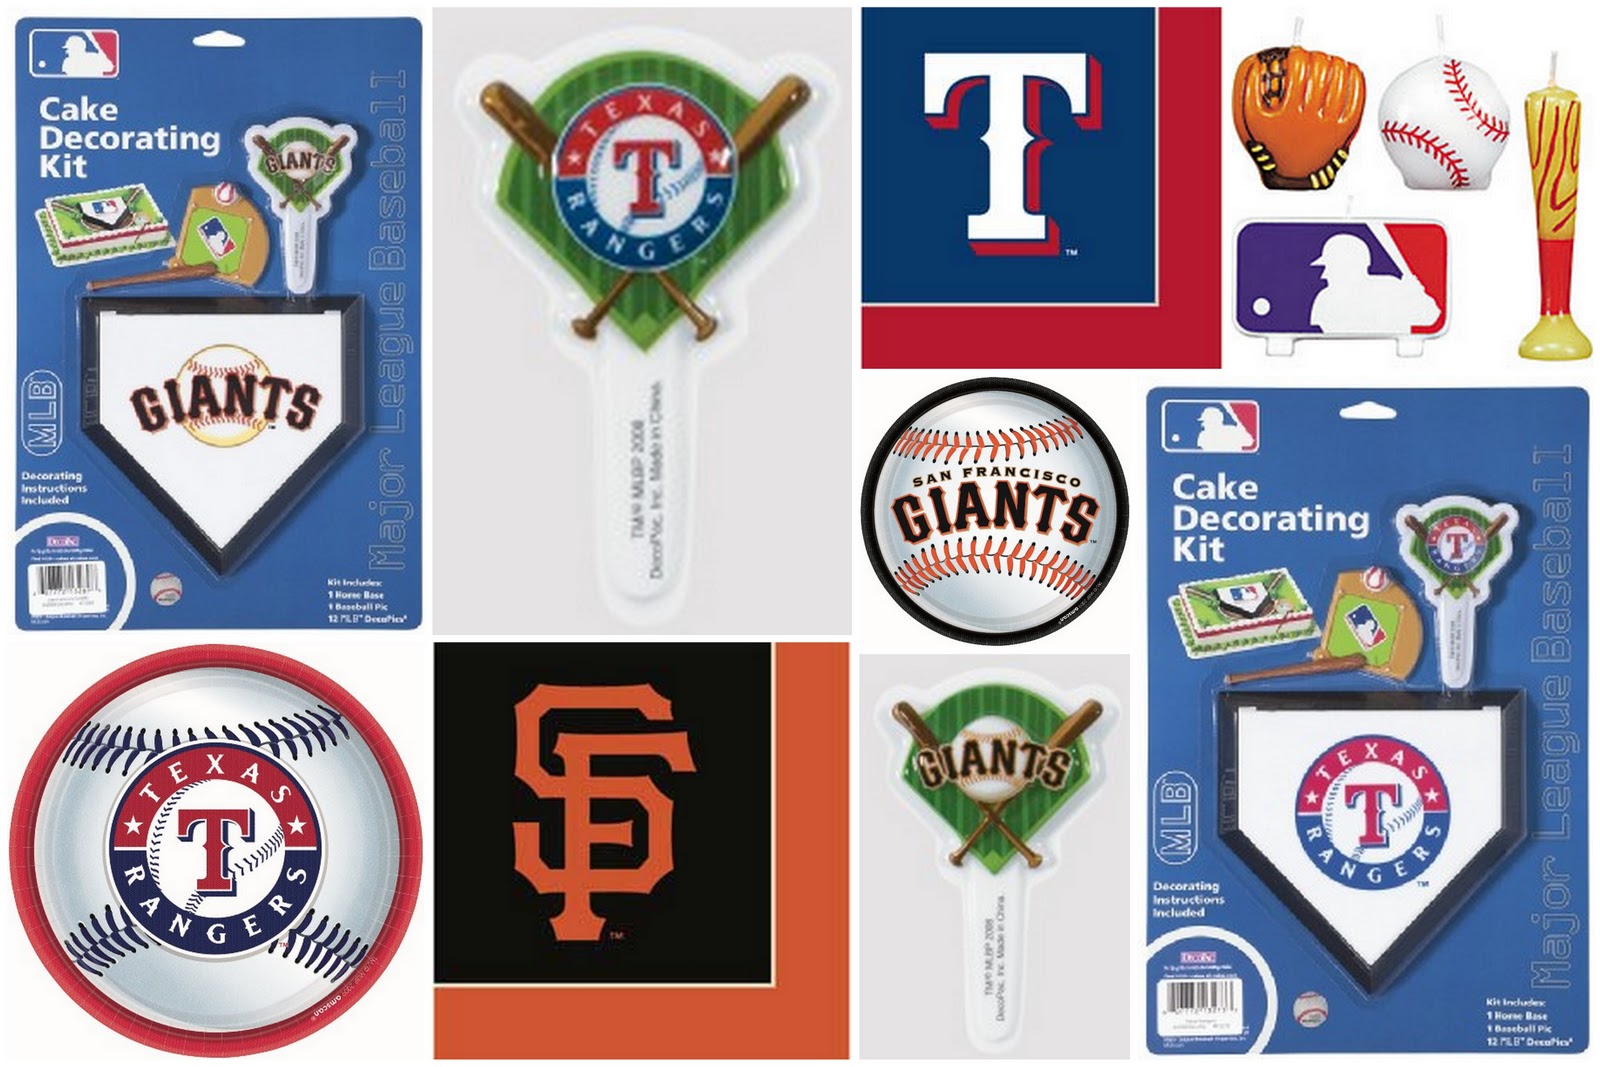 ... and San Francisco Giants supplies can be found on their website